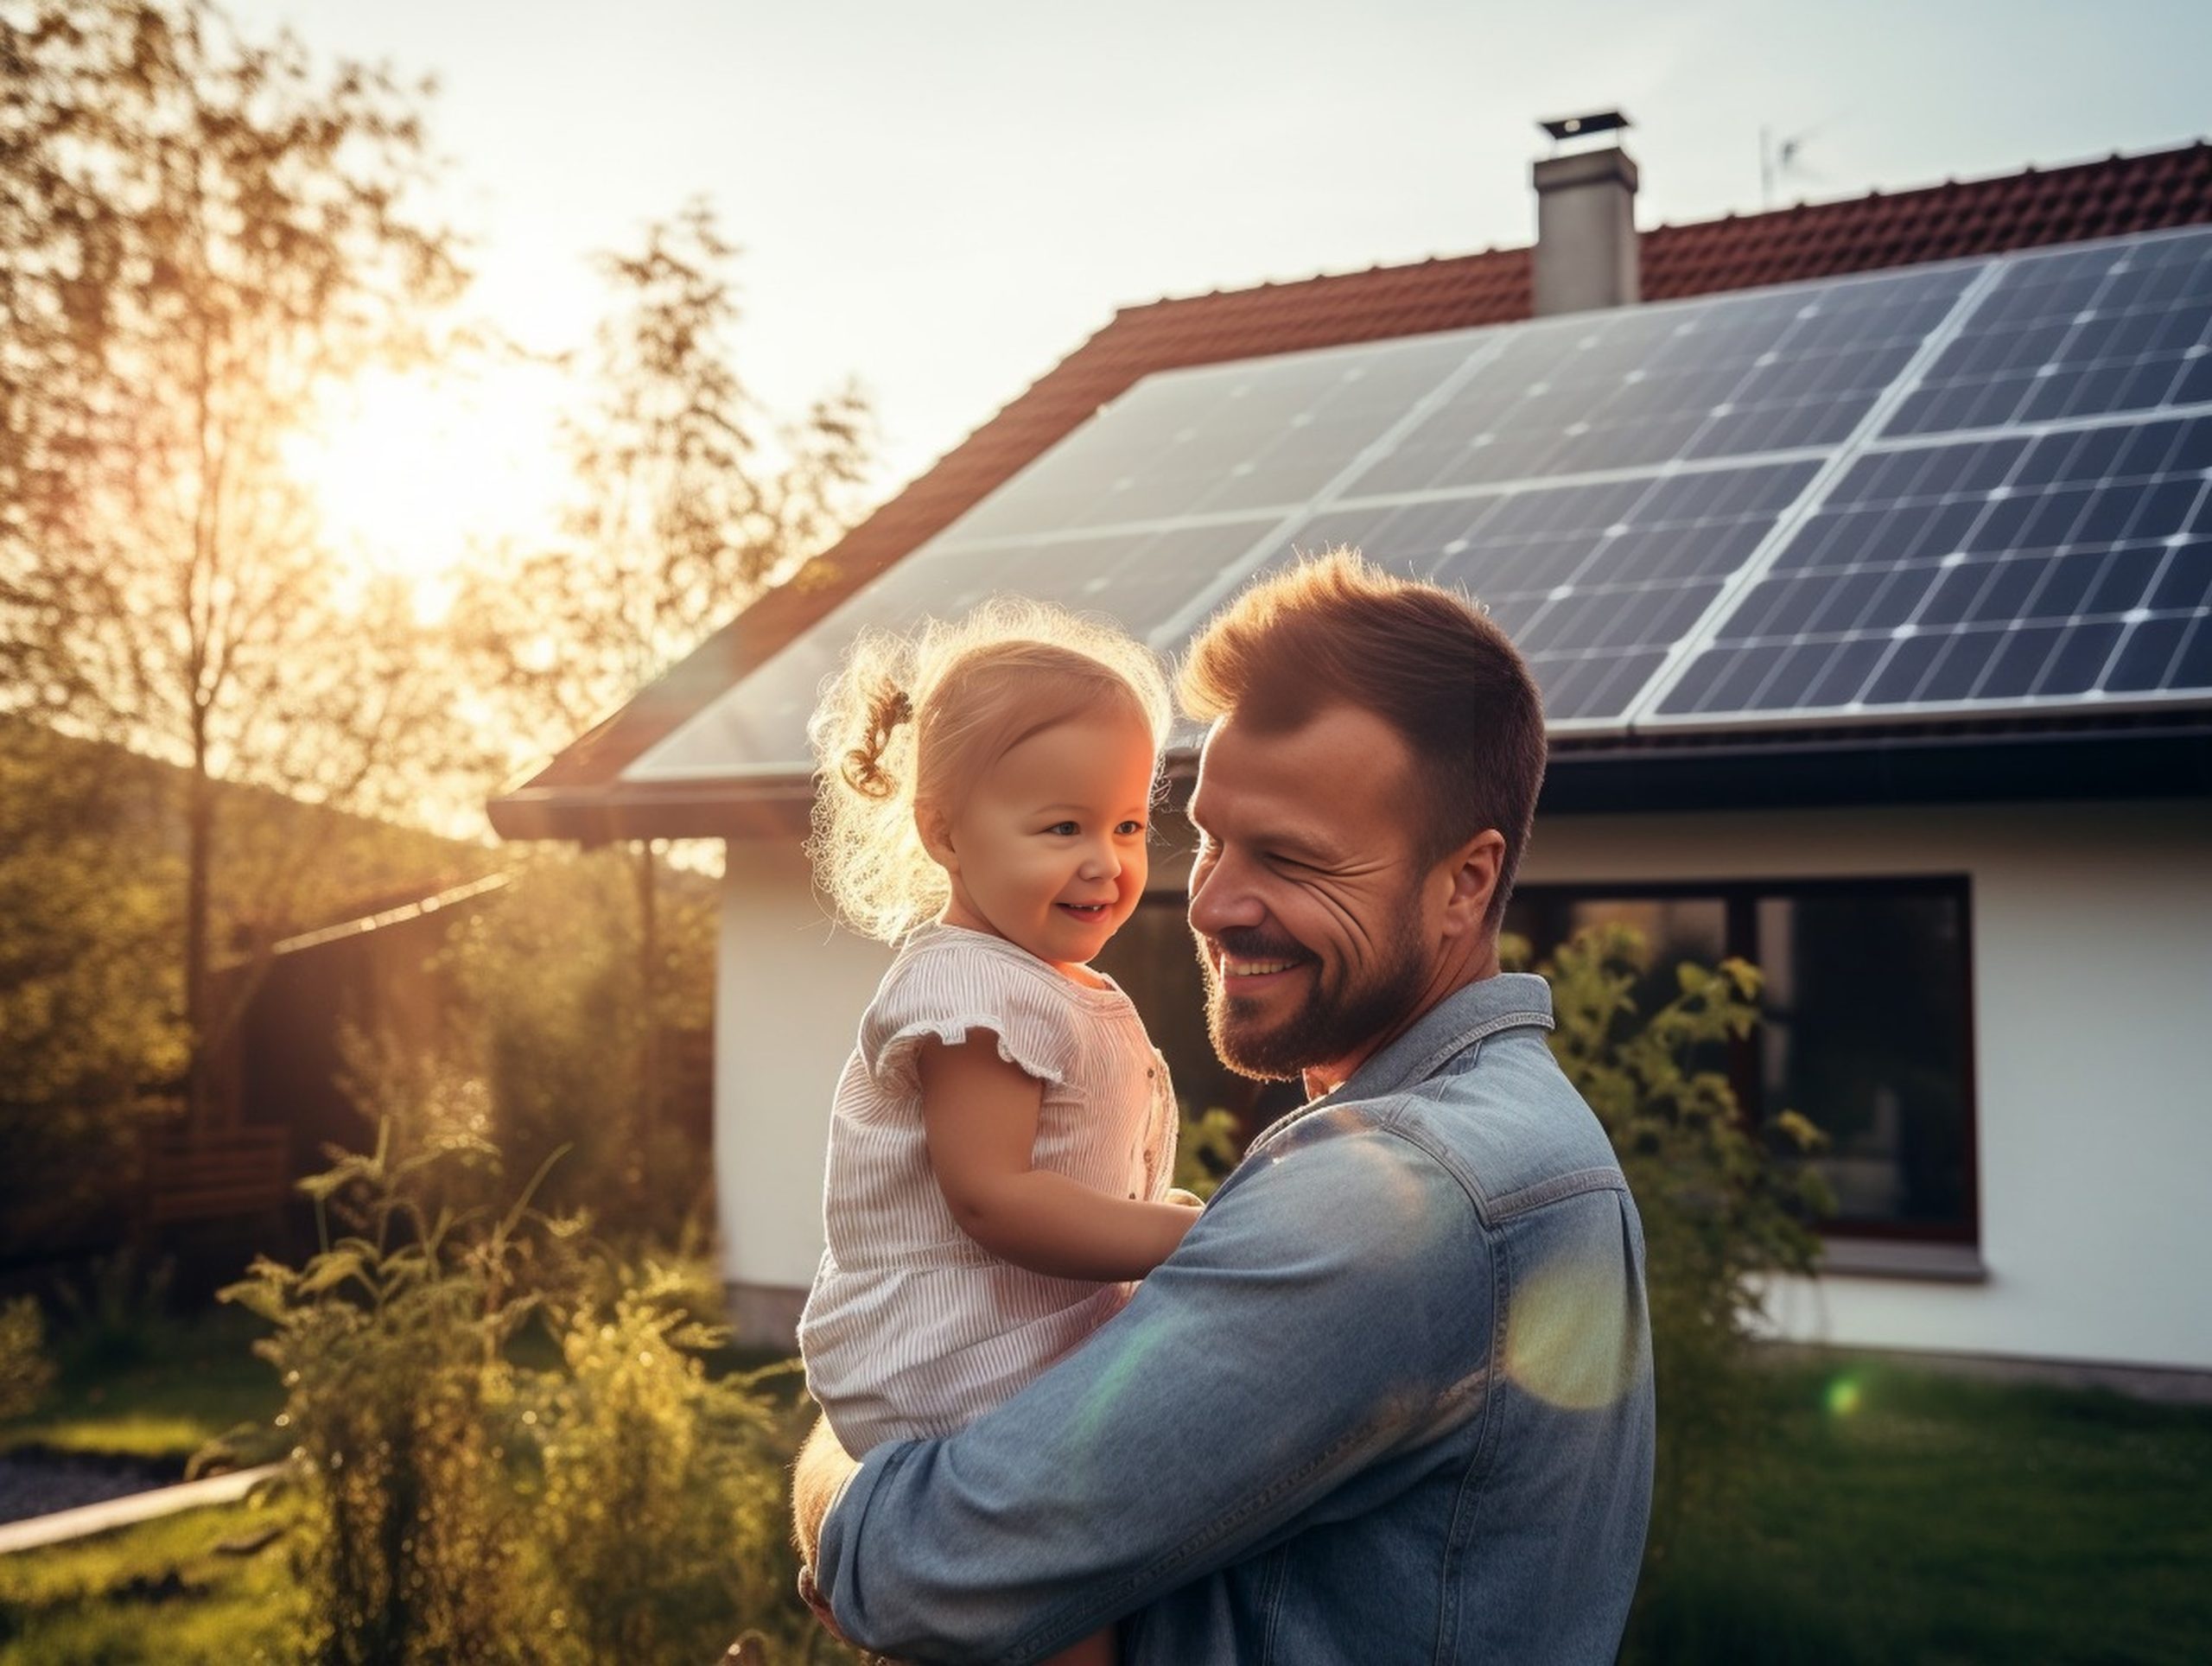 A father hugging his young daughter in a grassy yard in front of a house equipped with solar panels